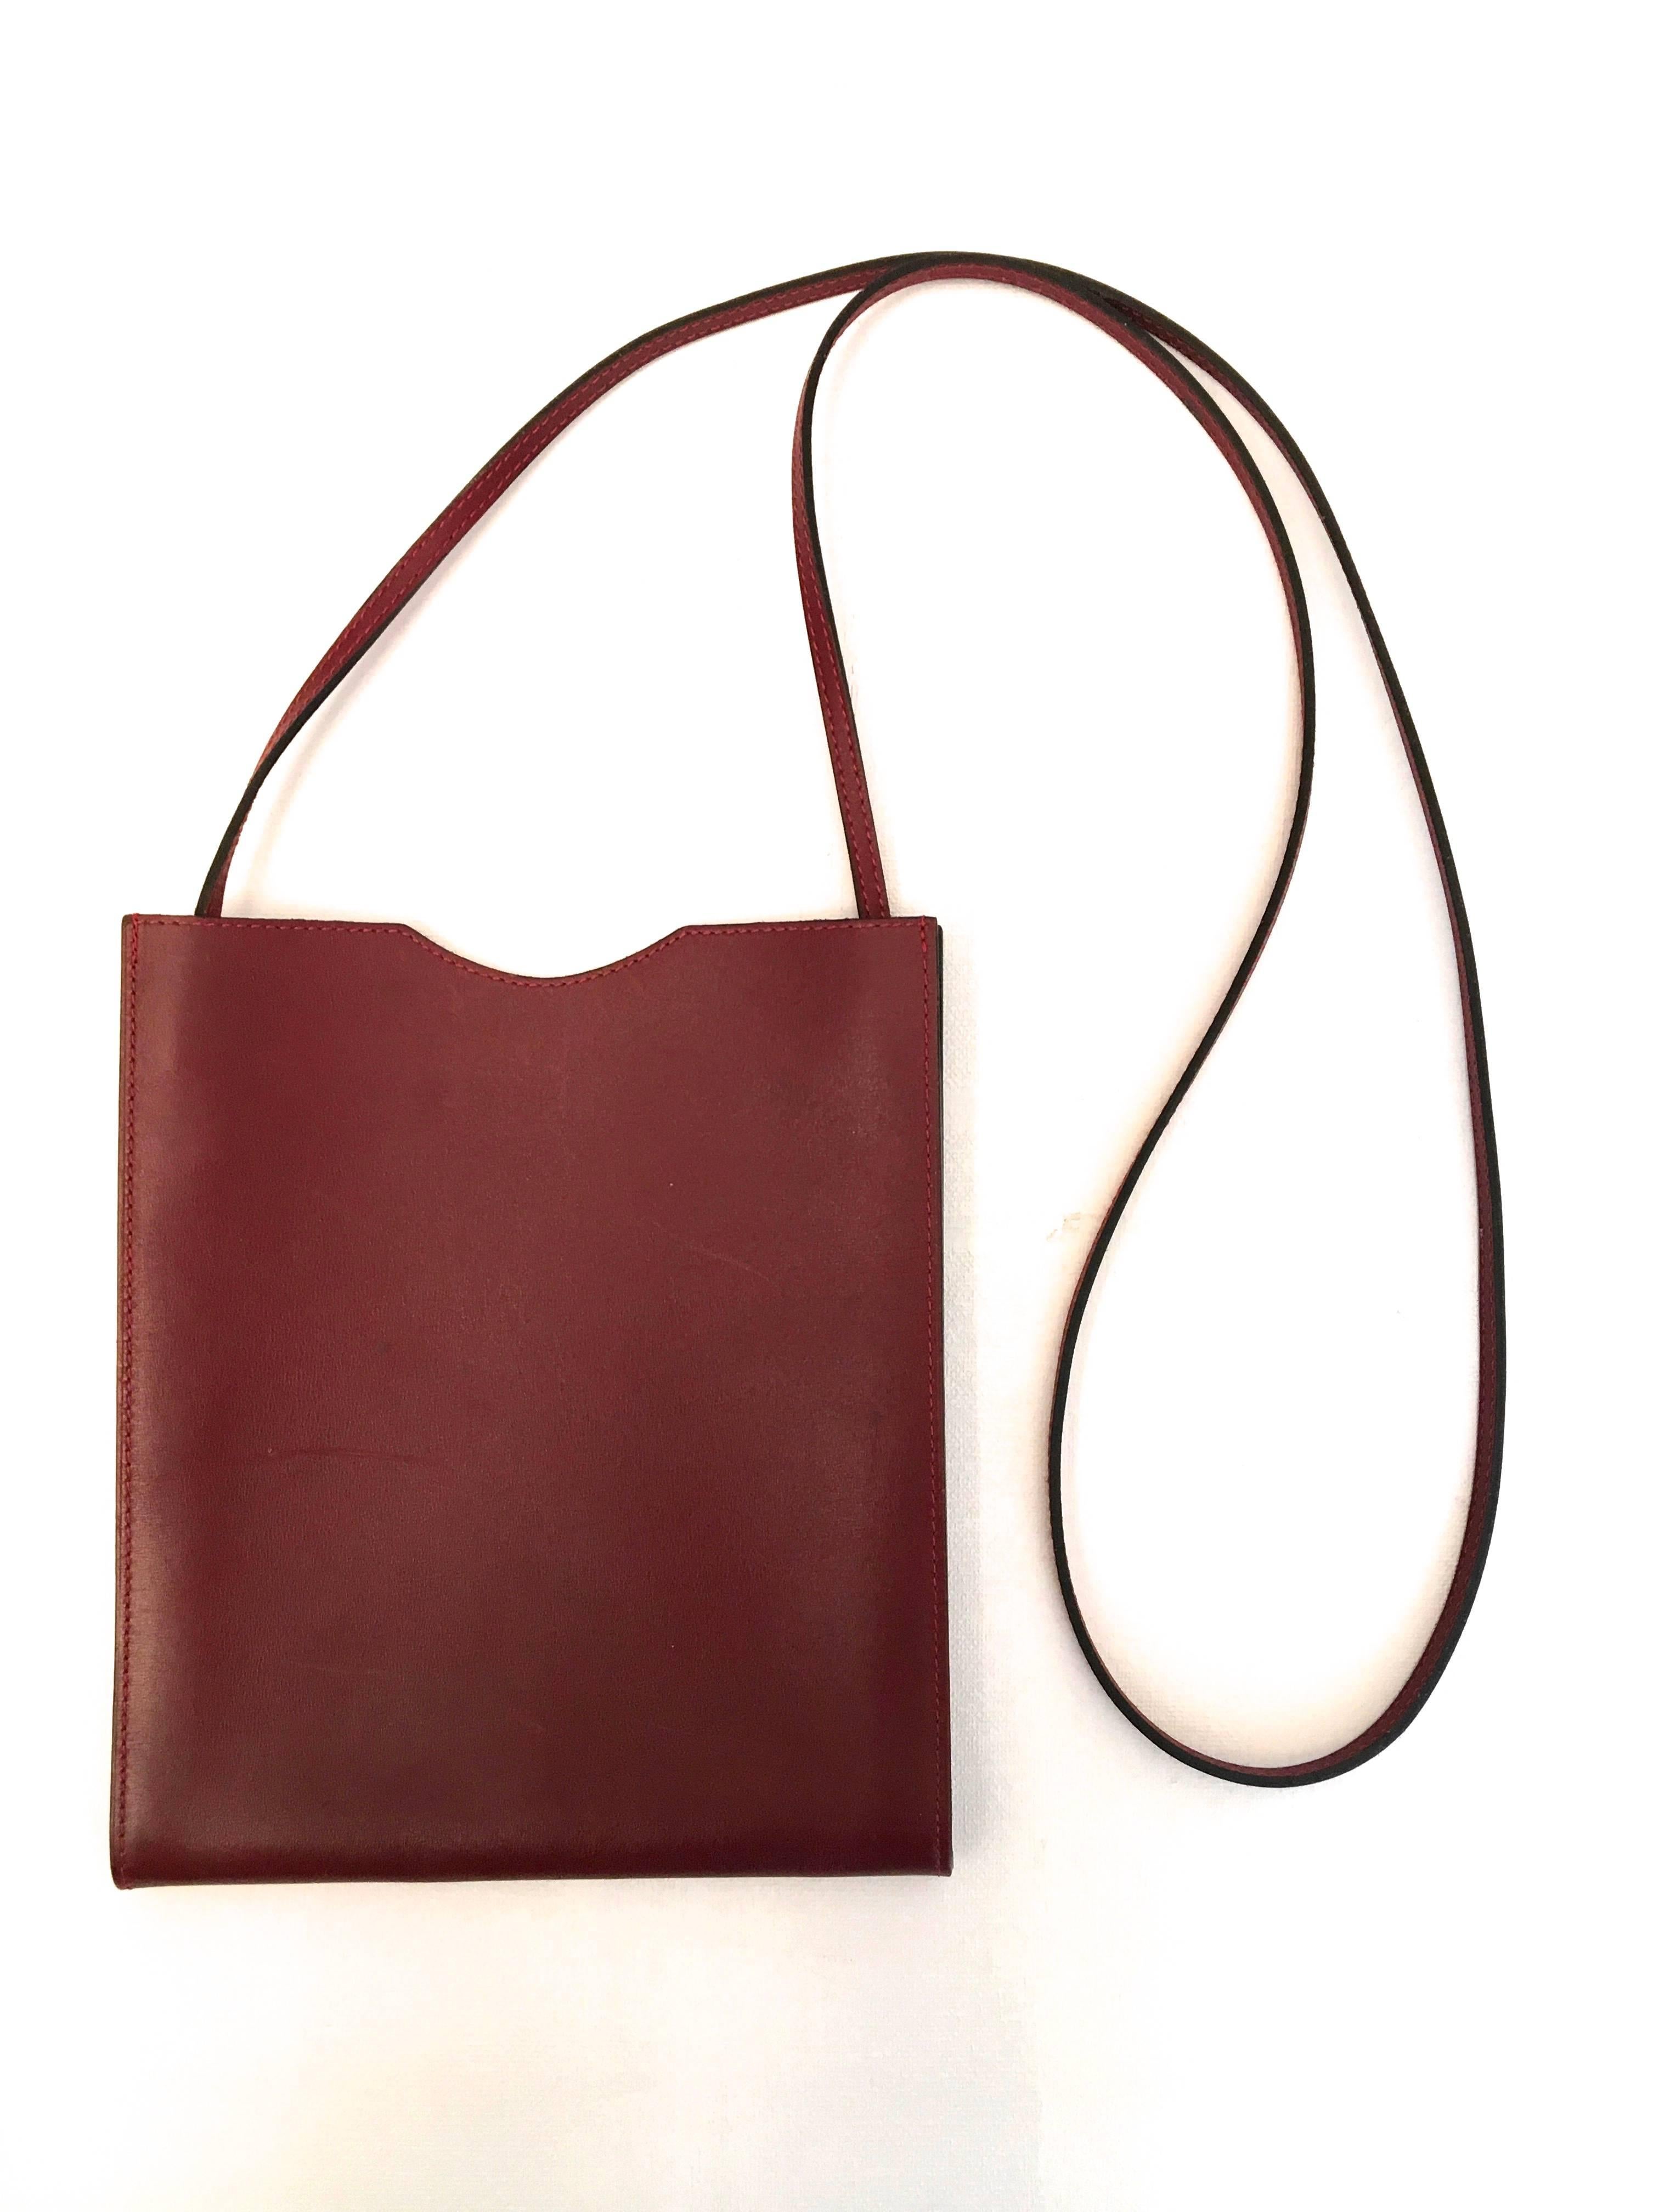 Presented here is a beautiful cross body bag from Hermes. The bag is a singular leather pouch that has one compartment with sufficient room for basic essentials. The soft grain of leather is a beautiful red color. The bag is in excellent condition